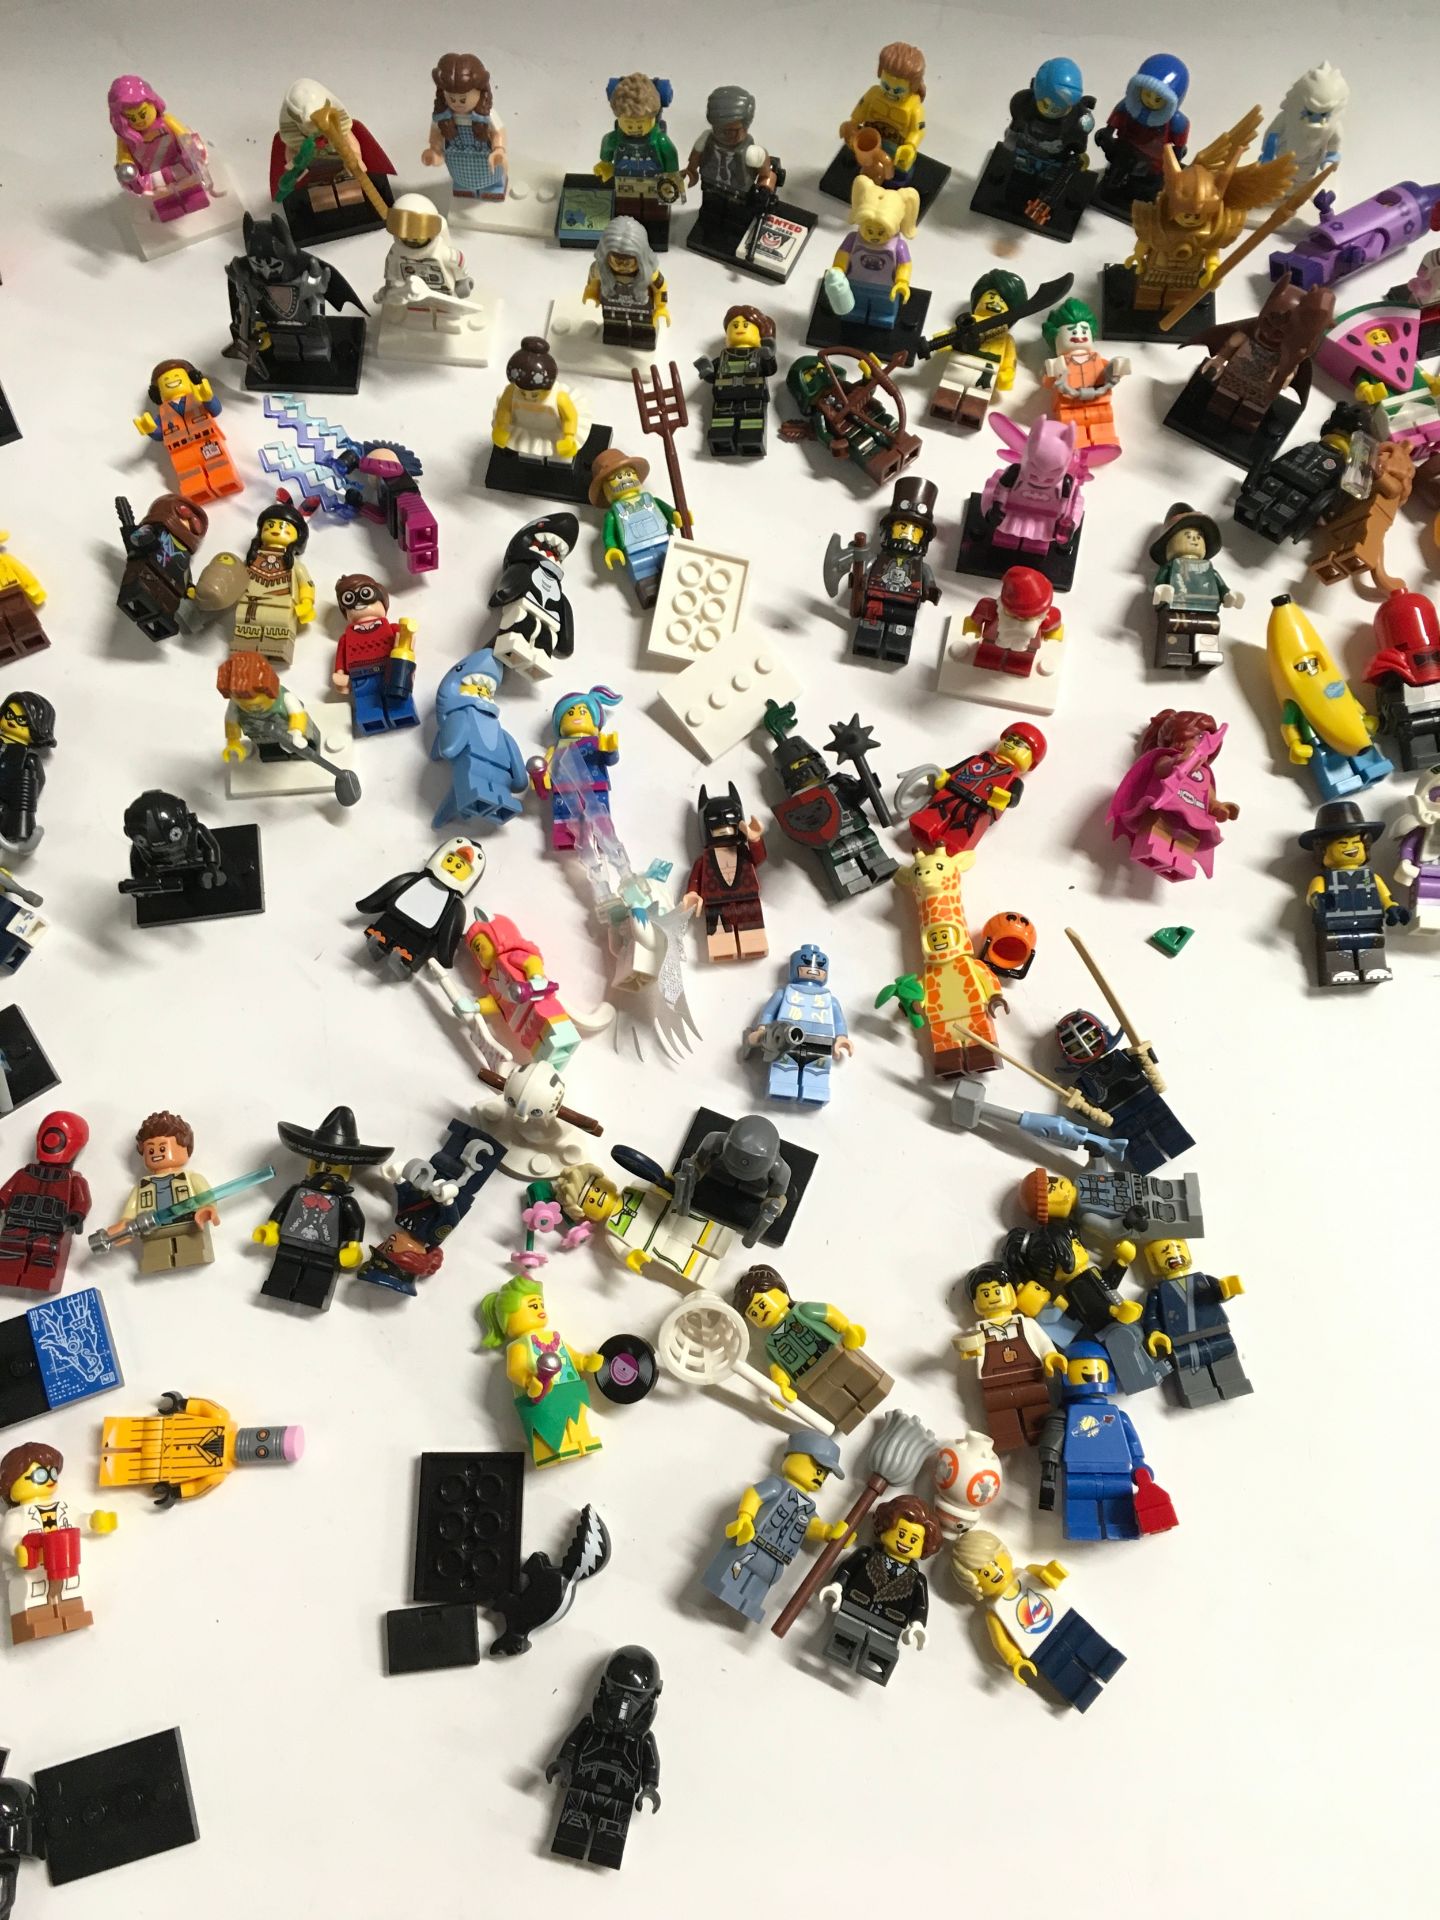 100+ Lego mini figures to include Star Wars, Batman, Wizard of Oz and others. - Image 3 of 4